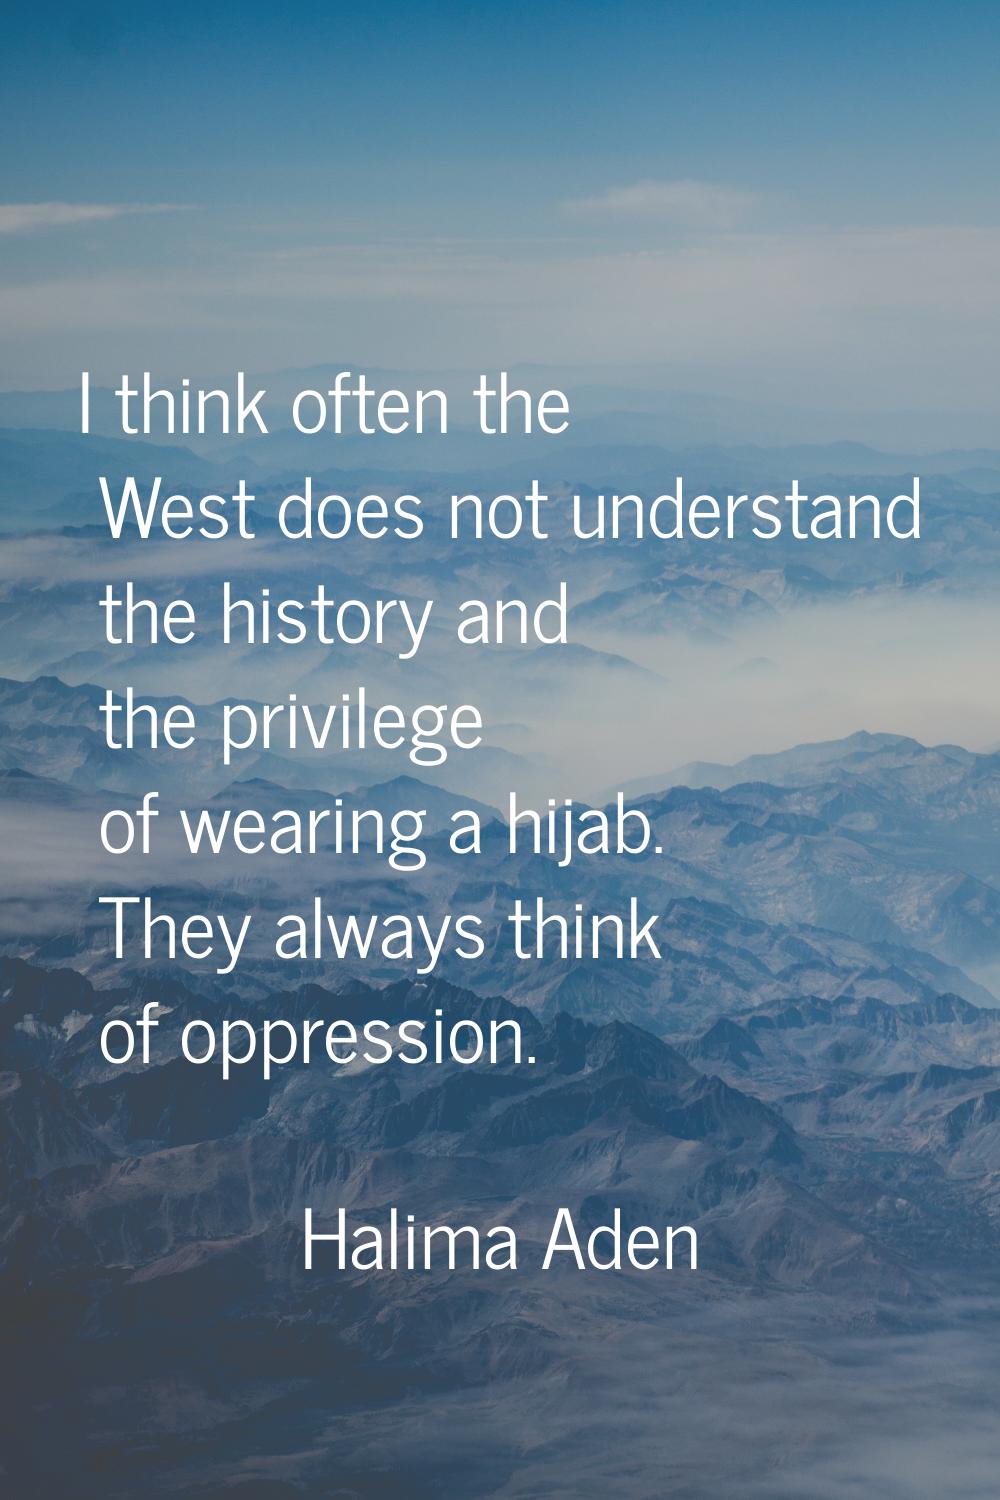 I think often the West does not understand the history and the privilege of wearing a hijab. They a